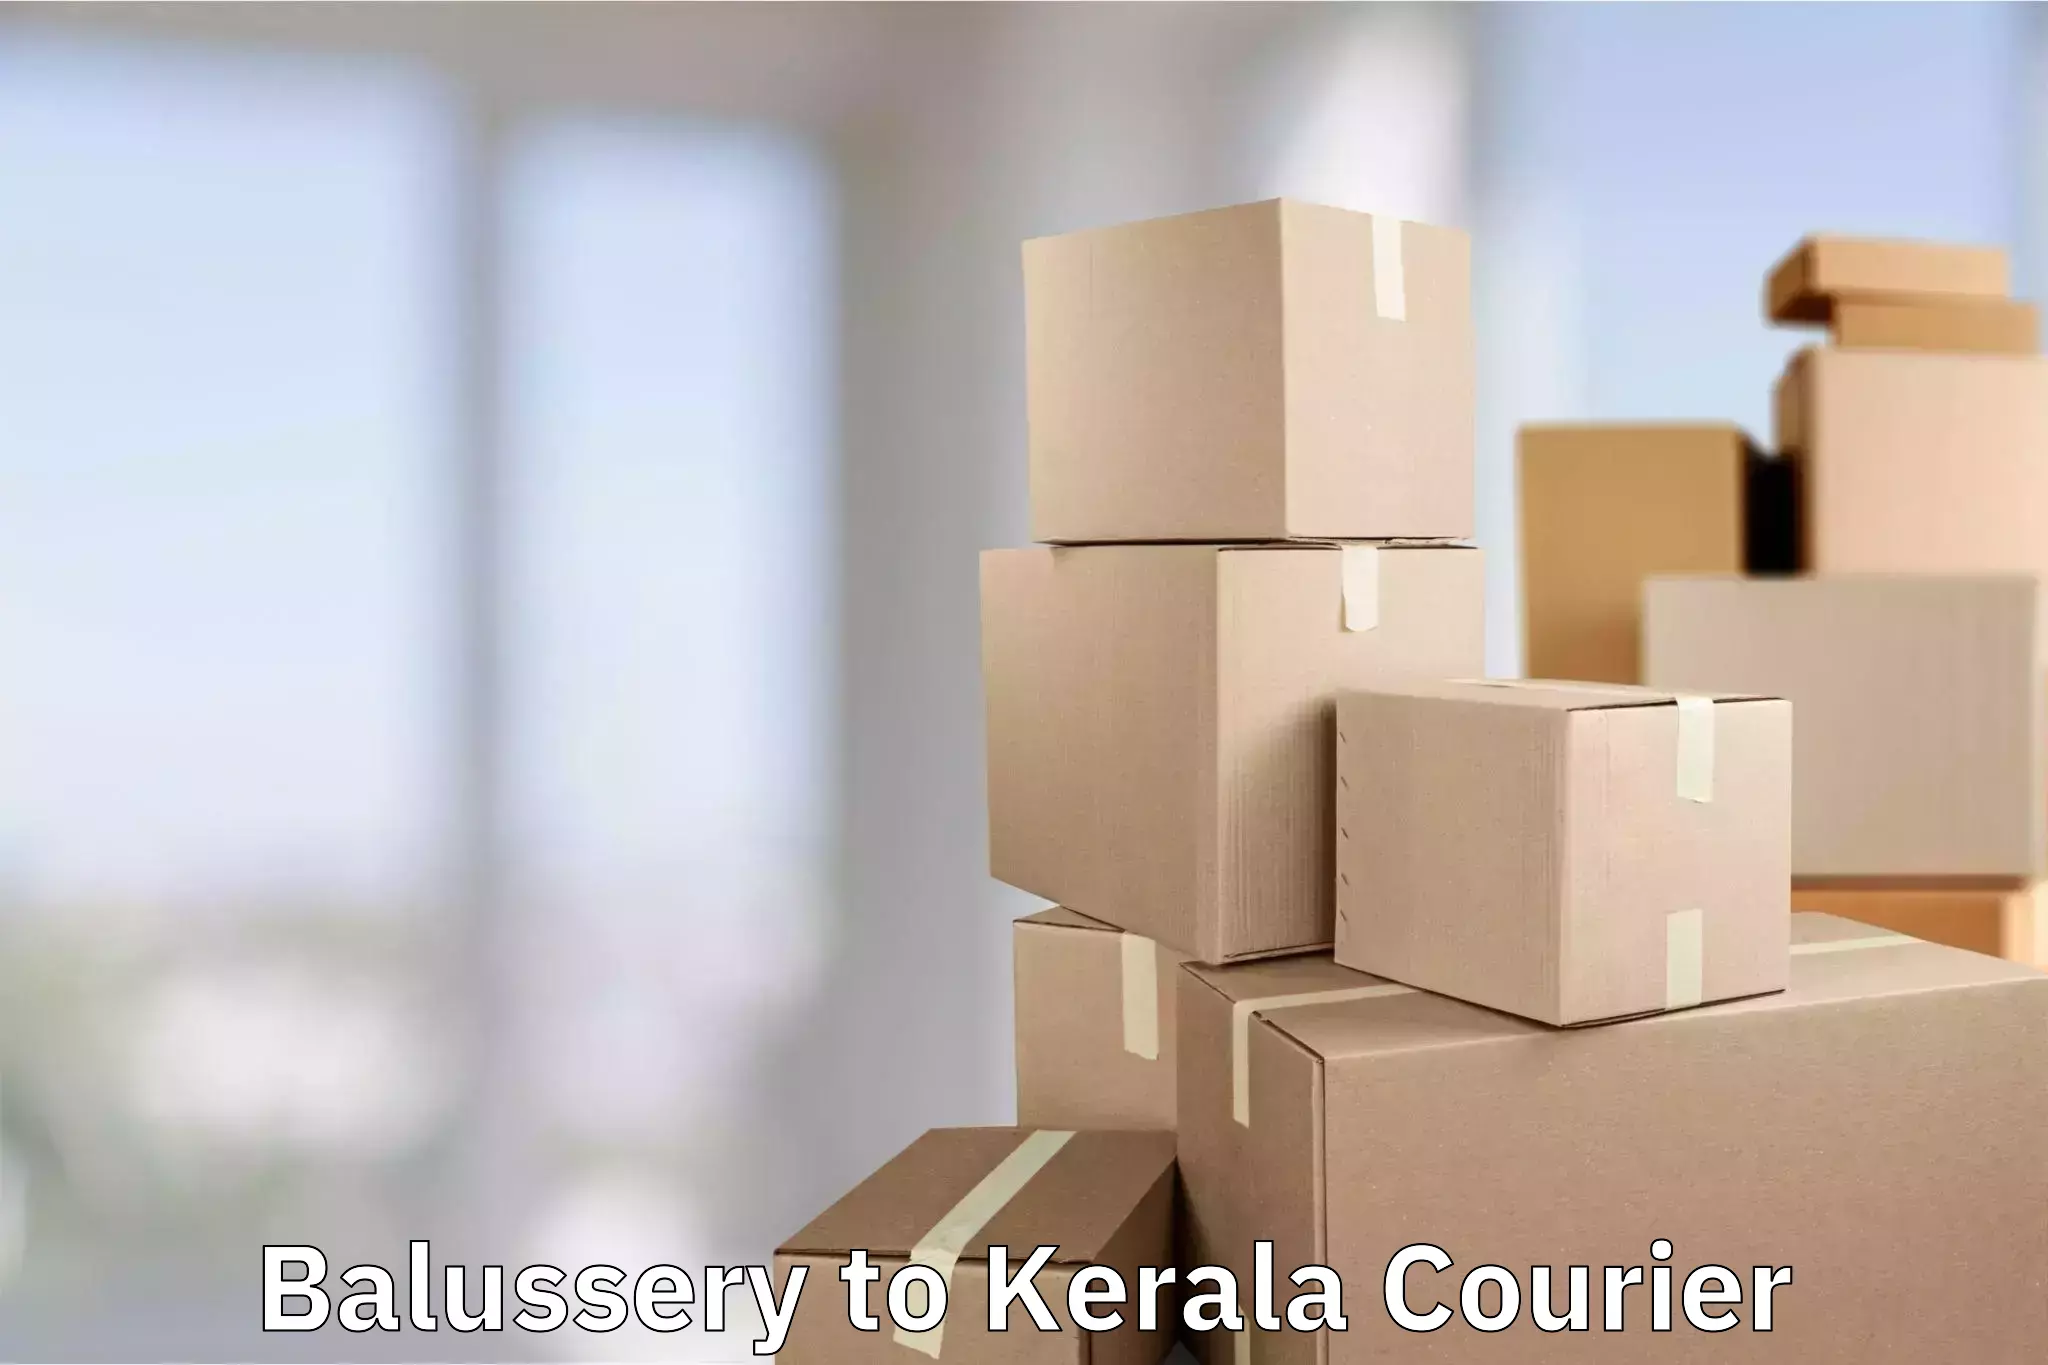 Rural baggage transport in Balussery to Cochin Port Kochi